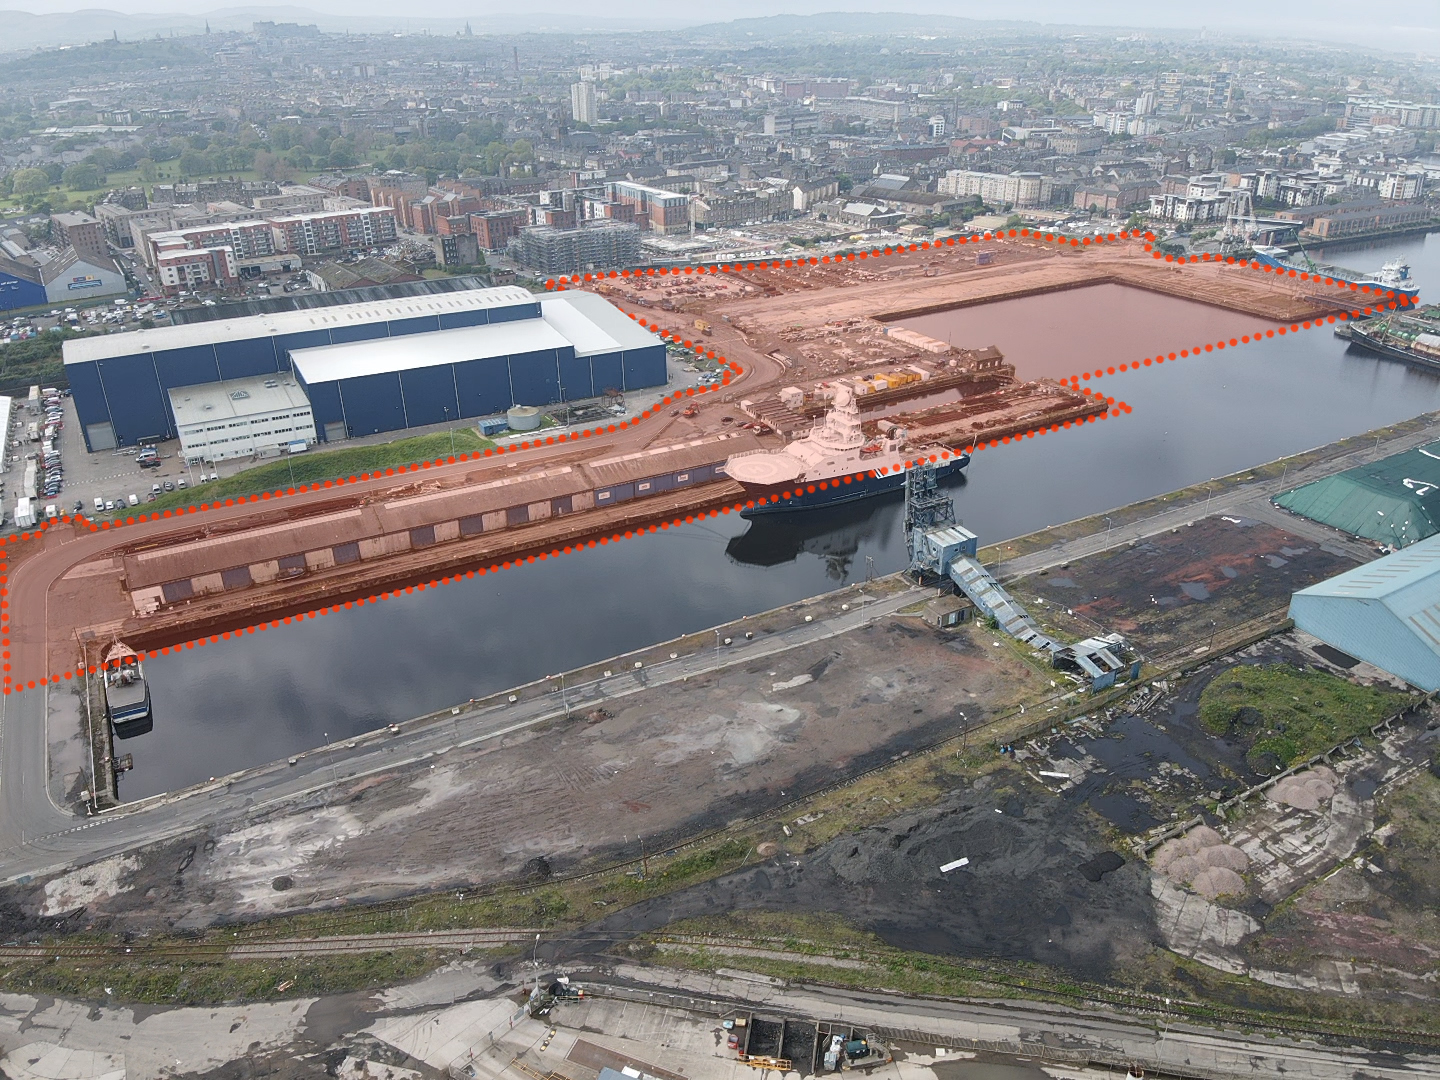 Forth Ports unveils plans for 700-800 homes at Leith waterfront development